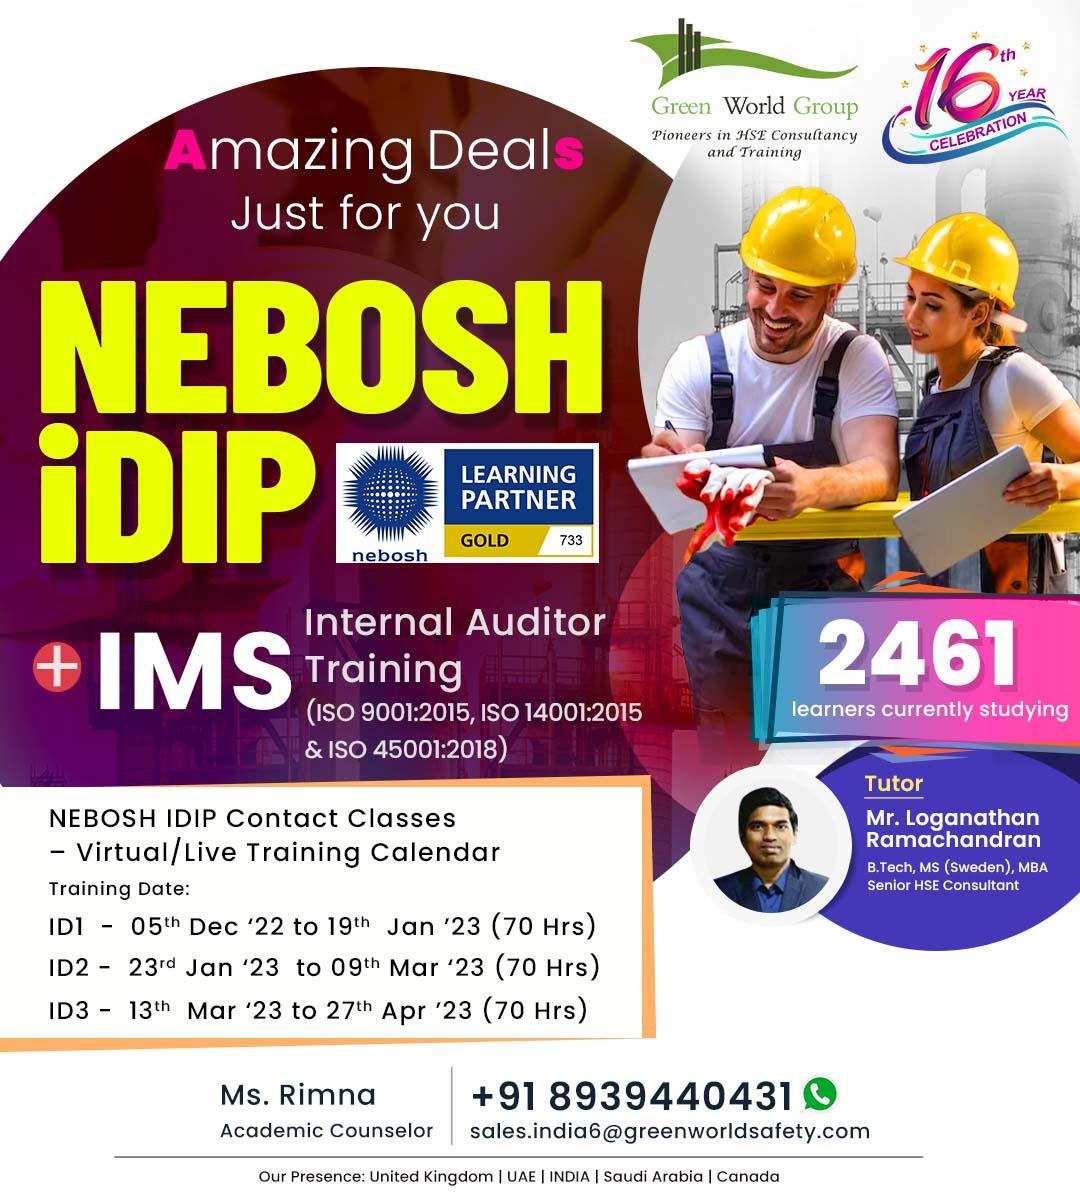 Exclusive Offer on NEBOSH IDIP!!